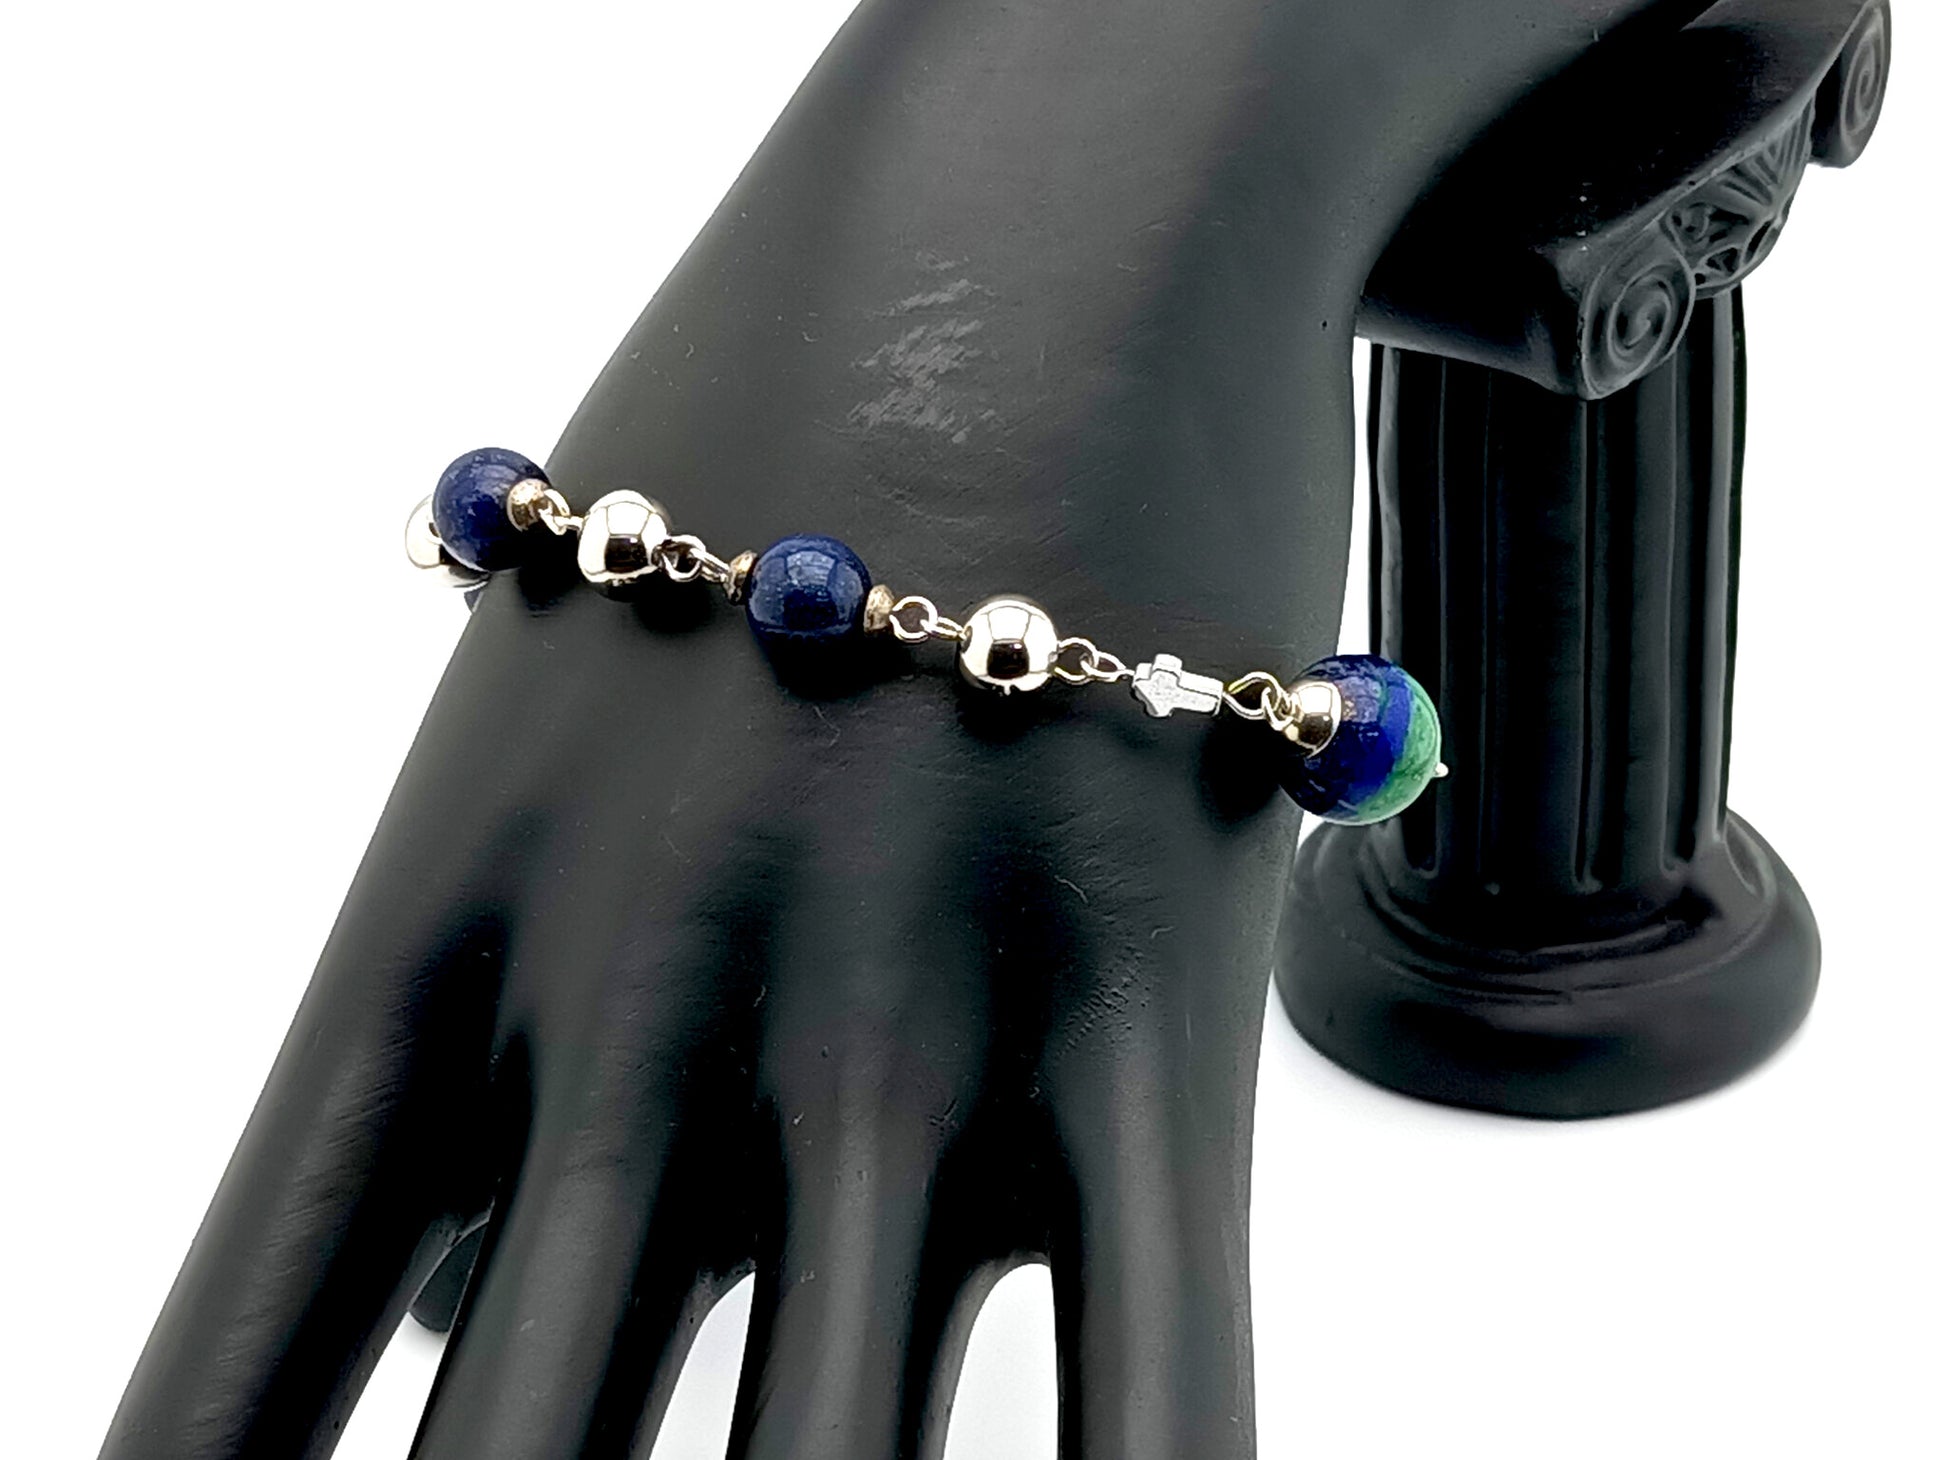 Stainless steel unique rosary beads single decade rosary bracelet with Lapis Lazuli beads, stainless steel lobster clasp and hematite cross.